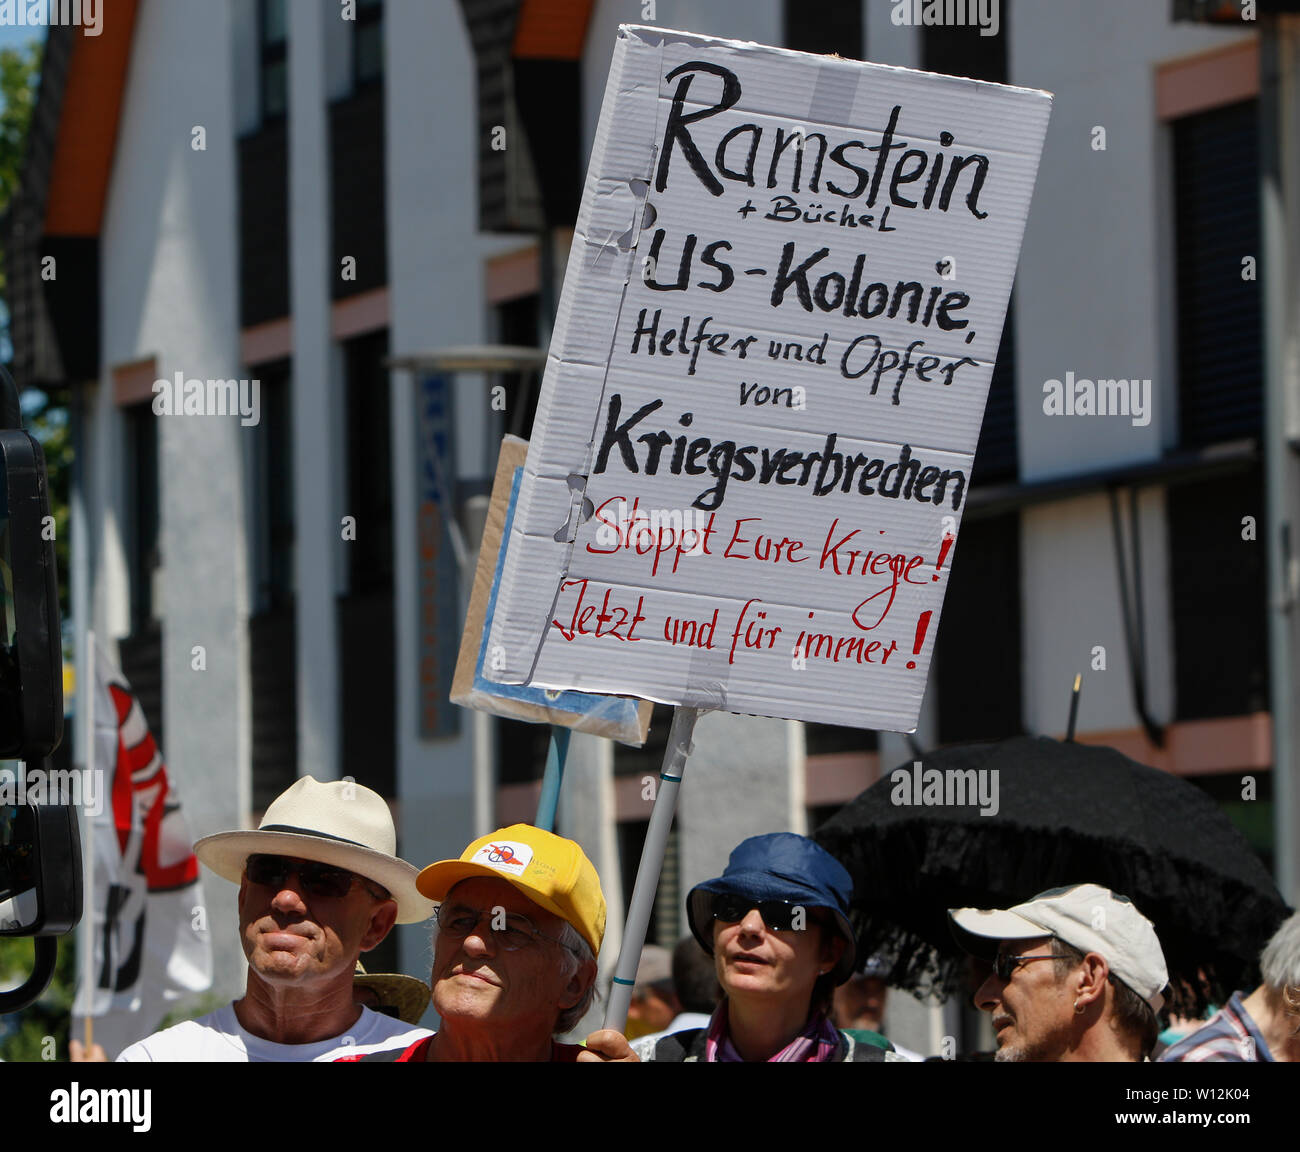 Ramstein, Germany. 29th June 2019. A protester holds up a sign that reads 'Ramstein `Buchel - US colony - assistants and victims of war crimes - Stop your wars! Now and forever!'.A few thousand peace activists from the Stopp Air Base Ramstein campaign protested outside the US airbase in Ramstein. The protest was the end of this year’s week of action against the airbase. The main focus of this year’s events was on the alleged involvement of the airbase in the drone warfare of the US Air Force in the Middle East and Africa and call to not use Ramstein for a future war with Iran. Stock Photo